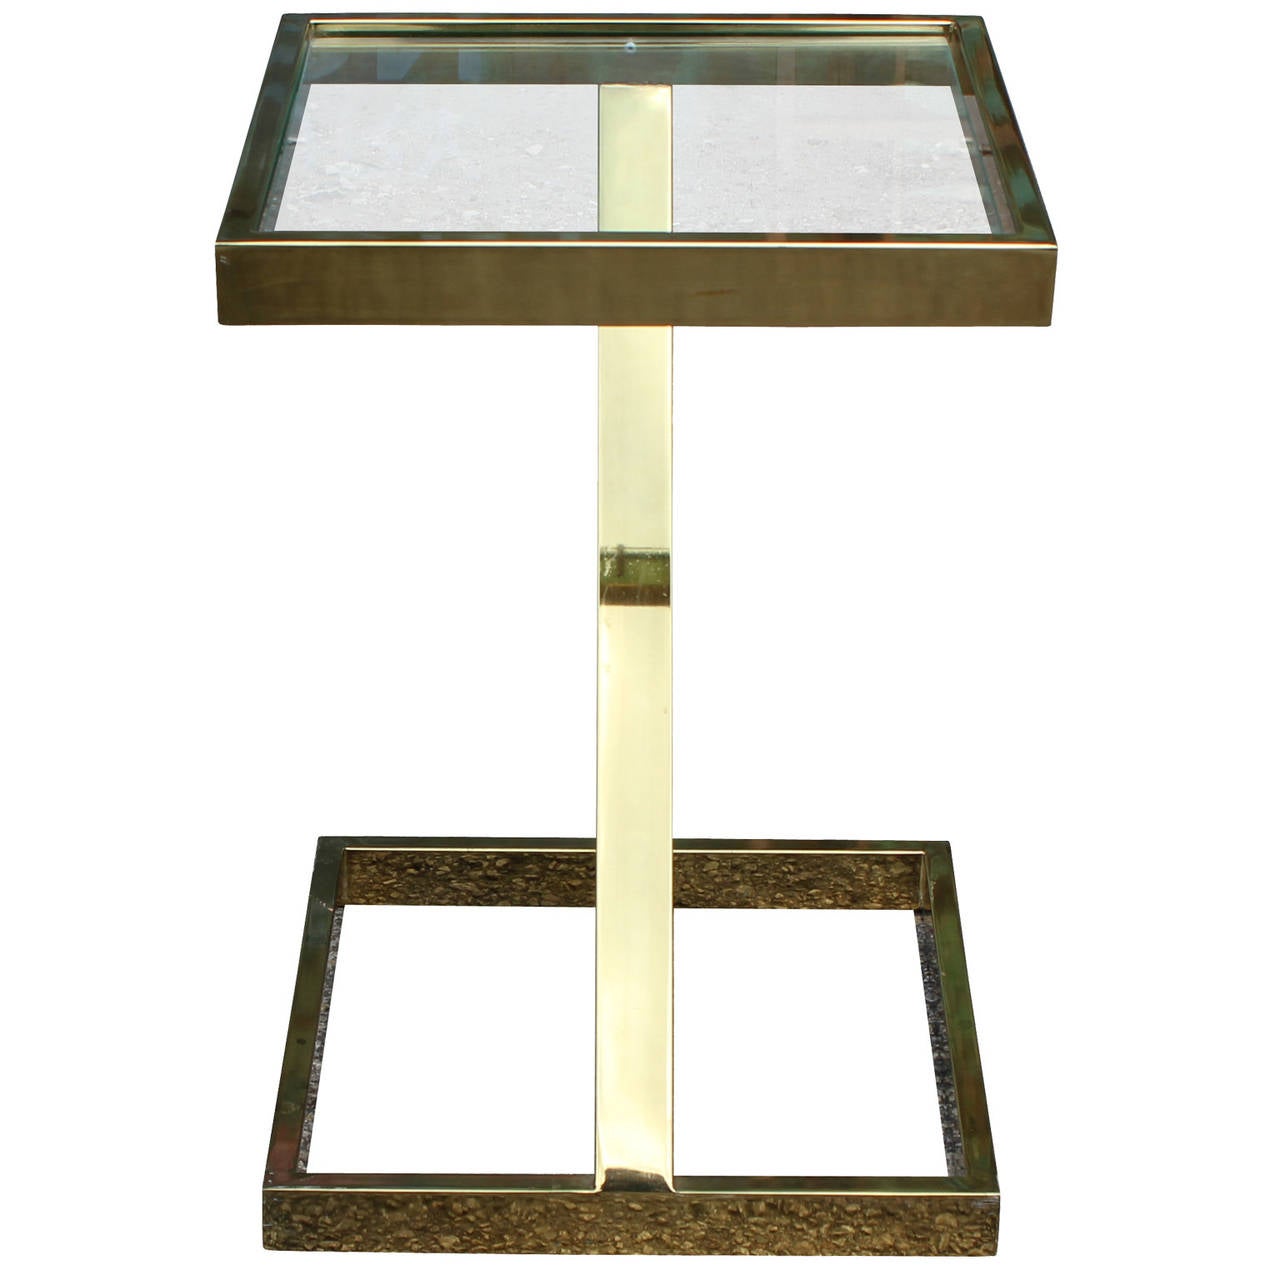 Great side table in the style of Milo Baughman for Design Institute America. Table is constructed of shiny brass with a single glass top. Angular piece is sure to add an architectural touch to any space.